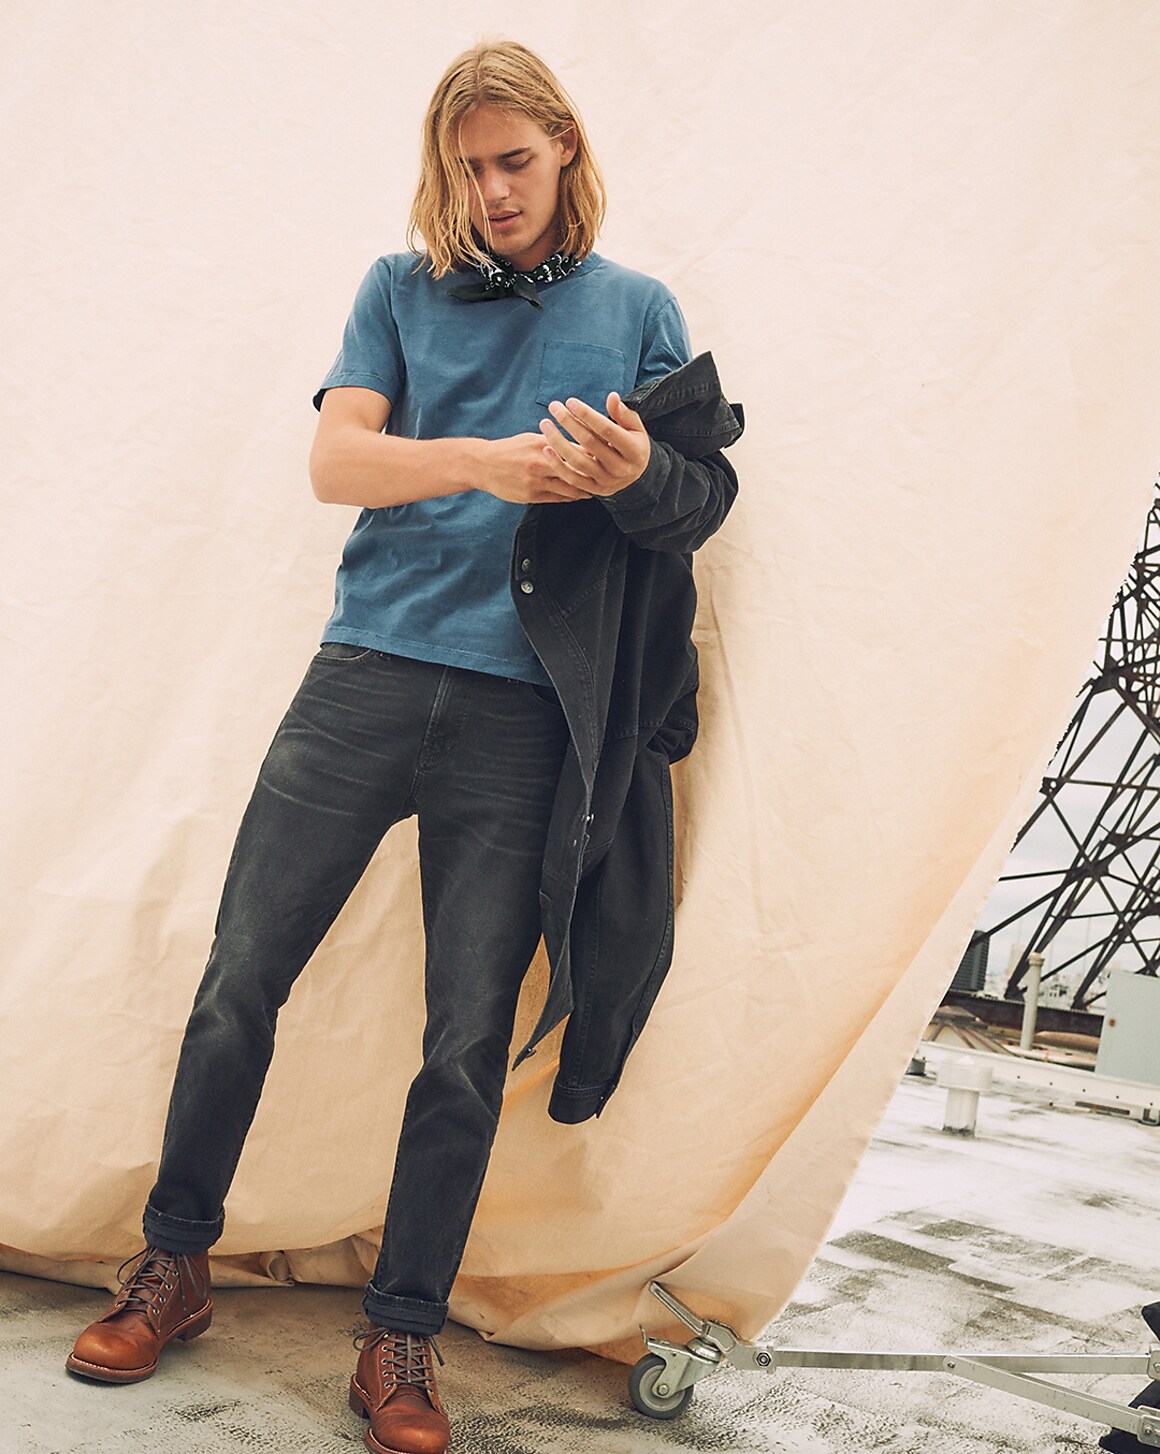 Behind The Design: All About Our Men’s Denim